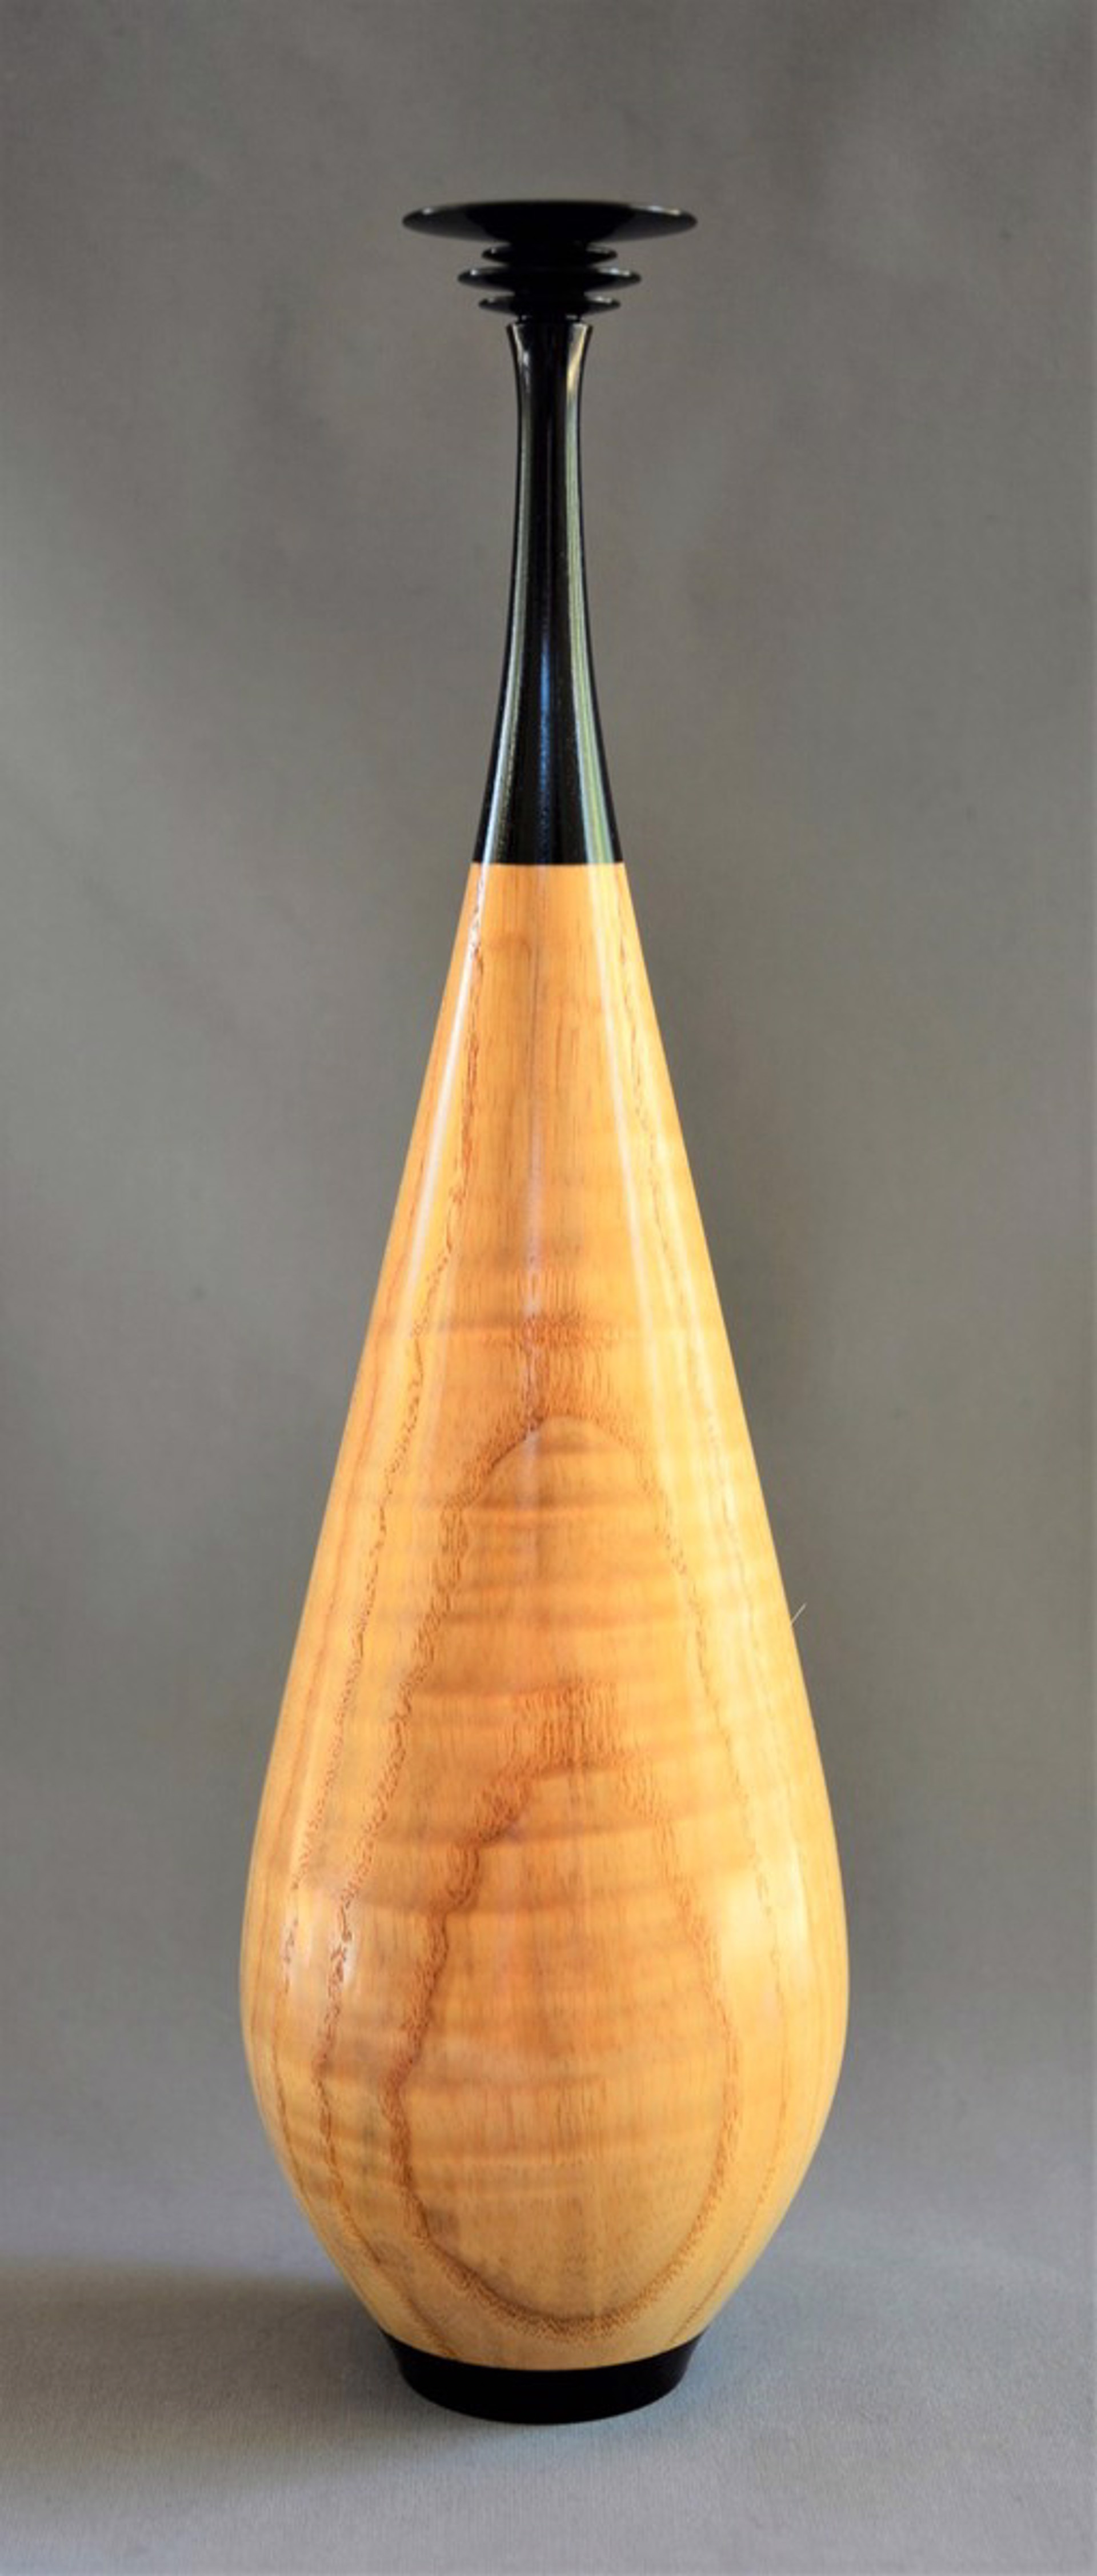 Blackwood and Curly Ash Vase by Paul Gray Diamond